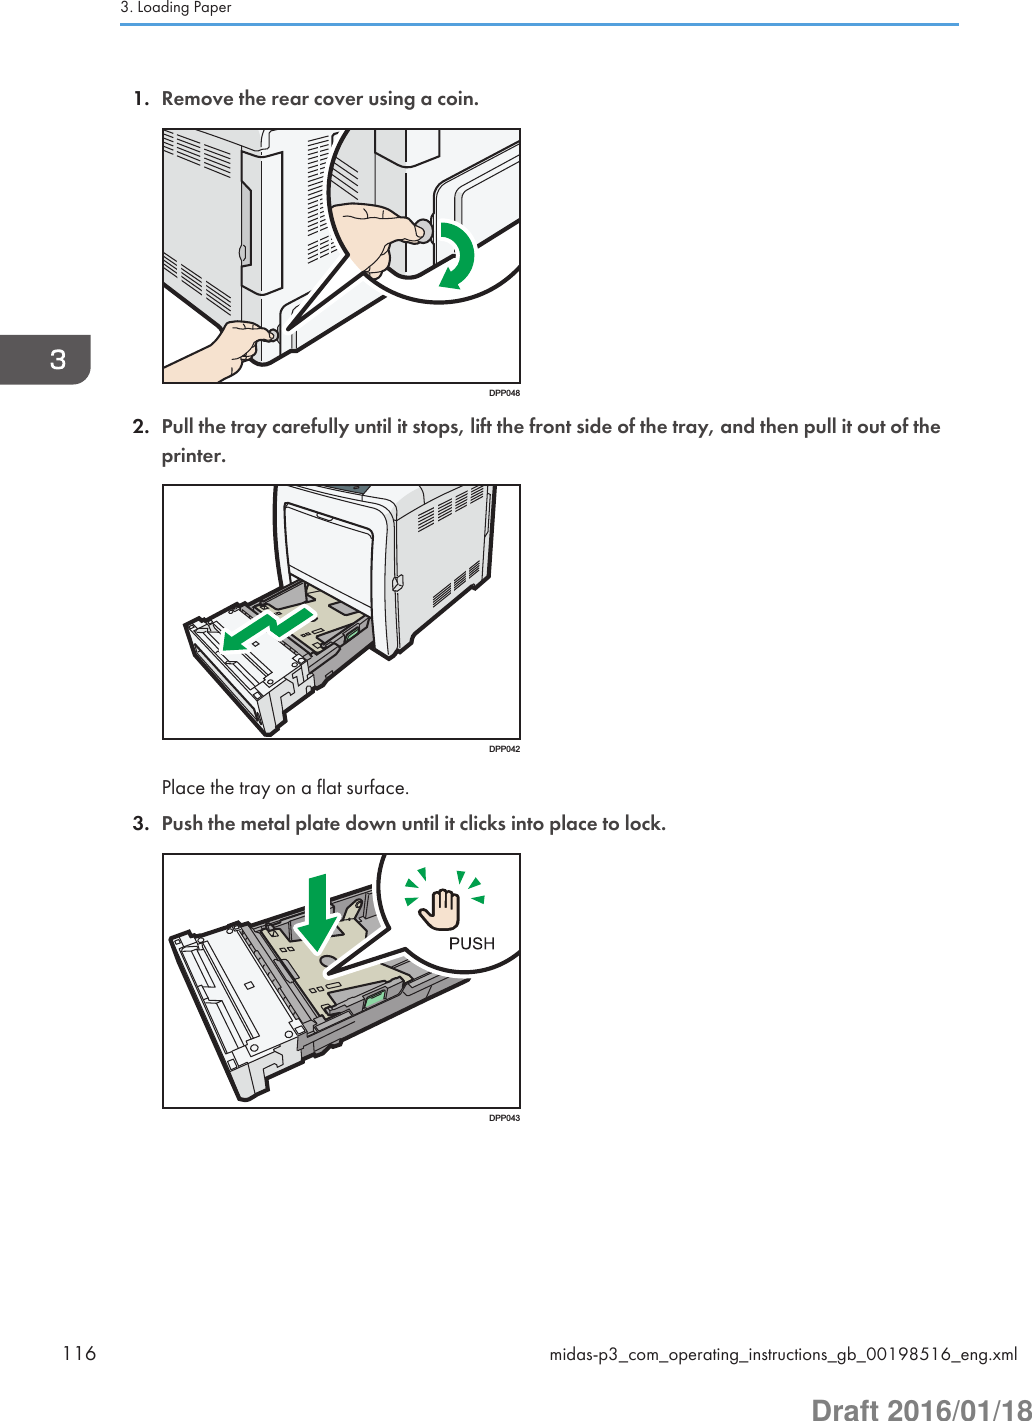 1. Remove the rear cover using a coin.DPP0482. Pull the tray carefully until it stops, lift the front side of the tray, and then pull it out of theprinter.DPP042Place the tray on a flat surface.3. Push the metal plate down until it clicks into place to lock.DPP0433. Loading Paper116 midas-p3_com_operating_instructions_gb_00198516_eng.xmlDraft 2016/01/18